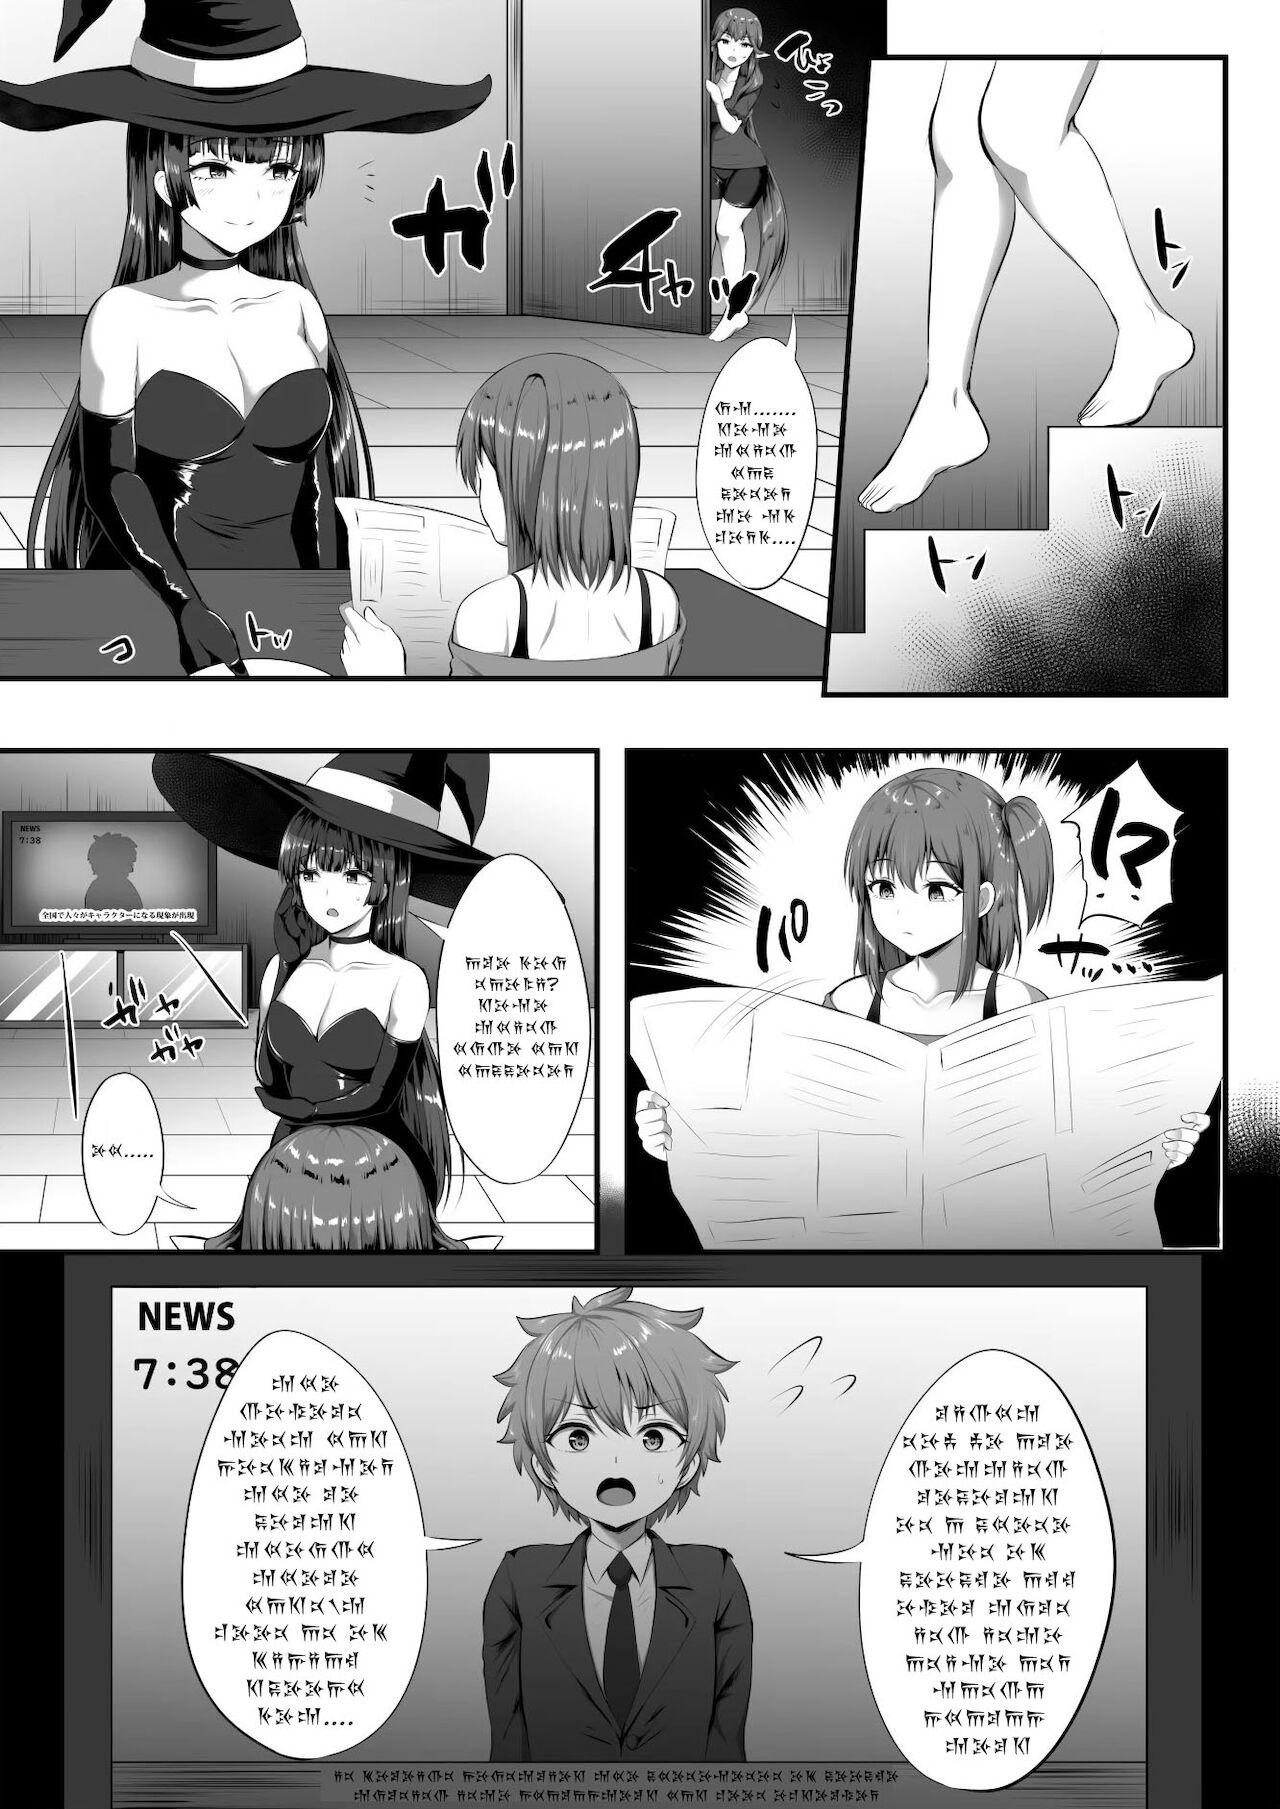 Couples ????????????????? - Fate grand order Bedroom - Page 10